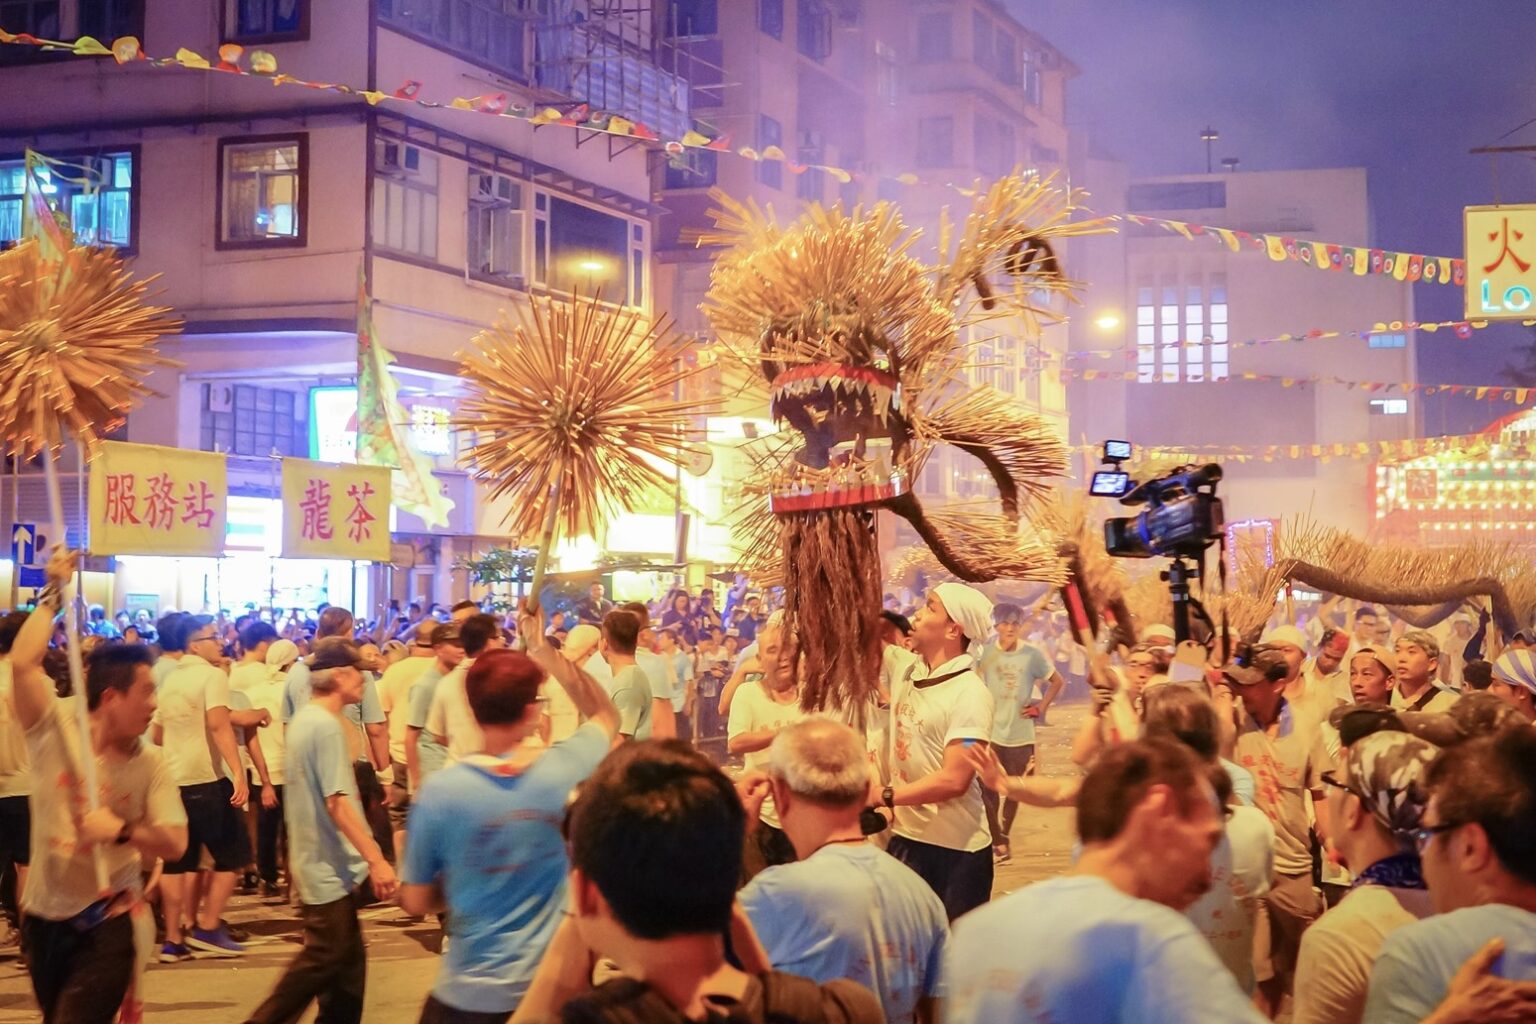 The Tai Hang Fire Dragon dance takes place in Hong Kong. The dragon, which is made out of incense sticks is held up by dancers and spun around, while spectators look on and try and photograph the dance.